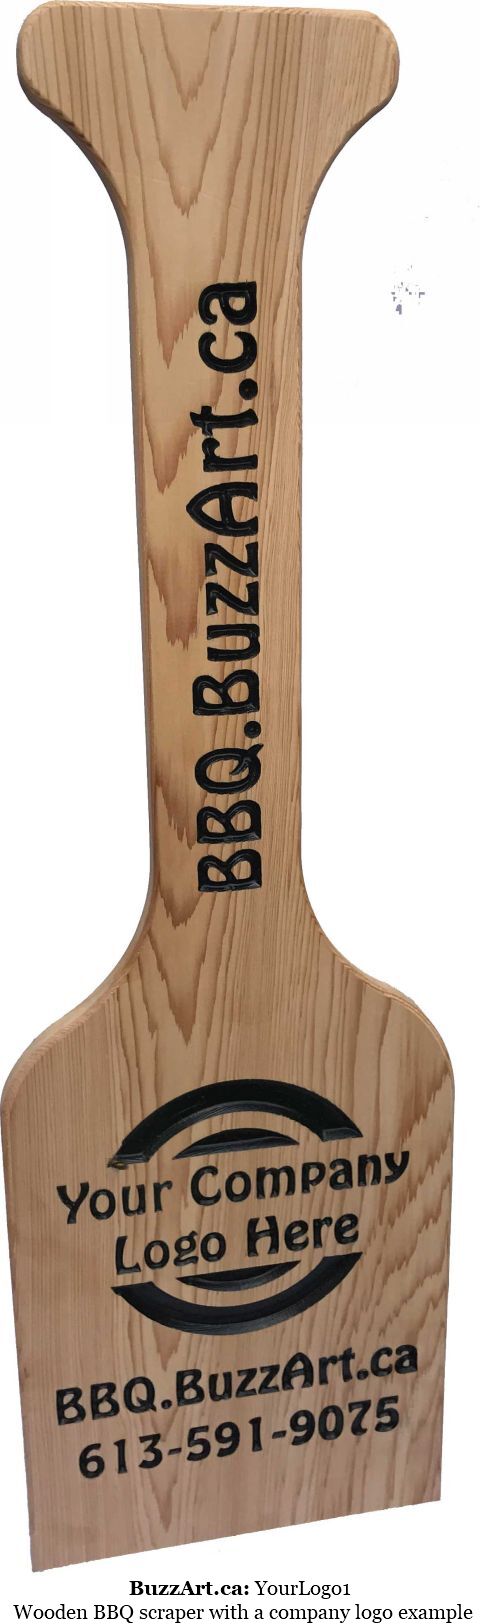 Wooden BBQ scraper with a company logo example